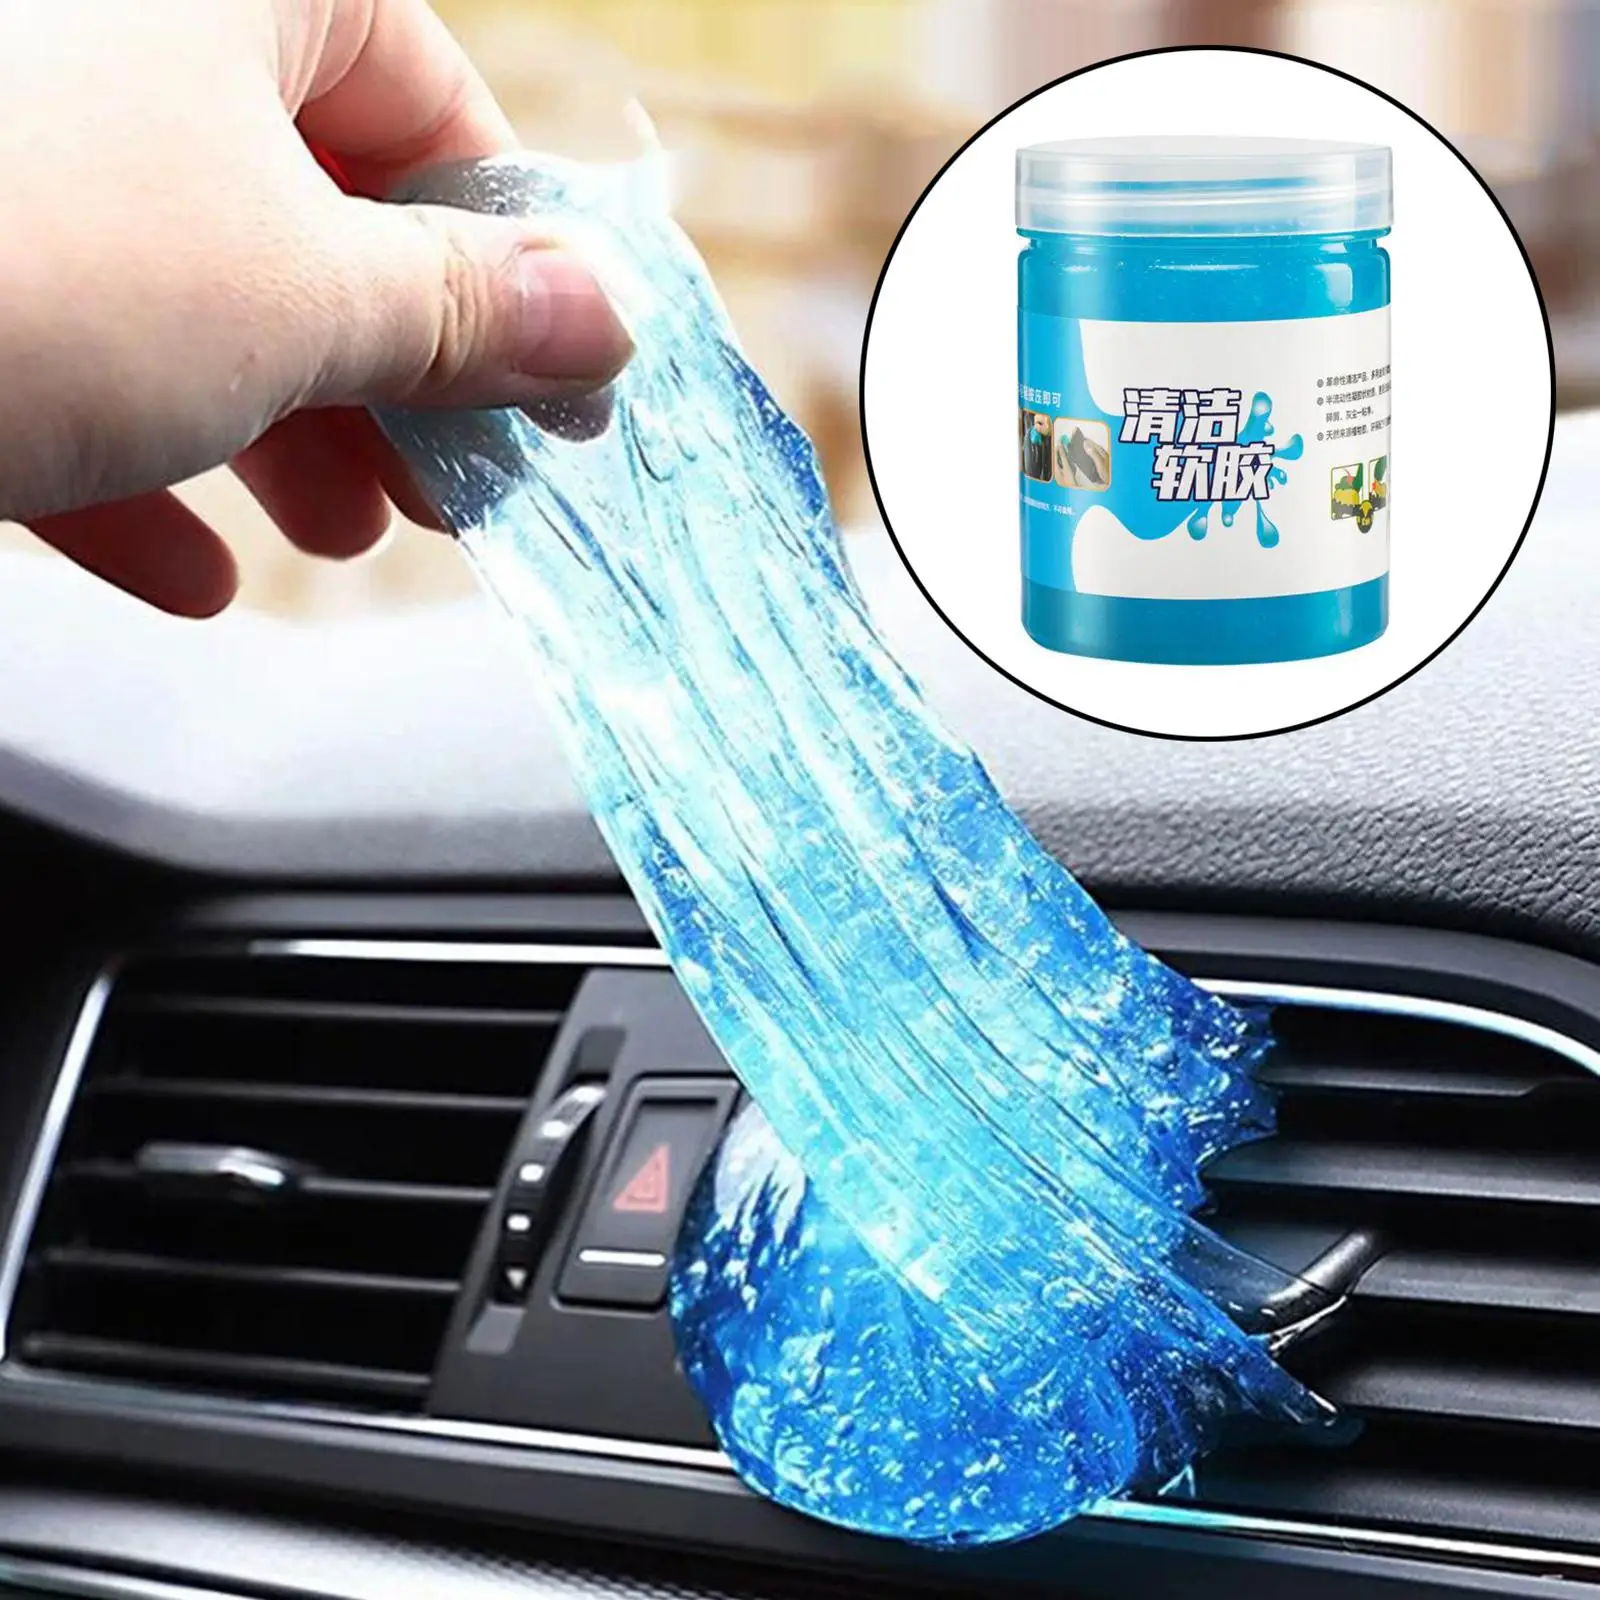 Universal Dust Cleaner Cleaning Gel for Car, Laptops,, Cameras Cleaning